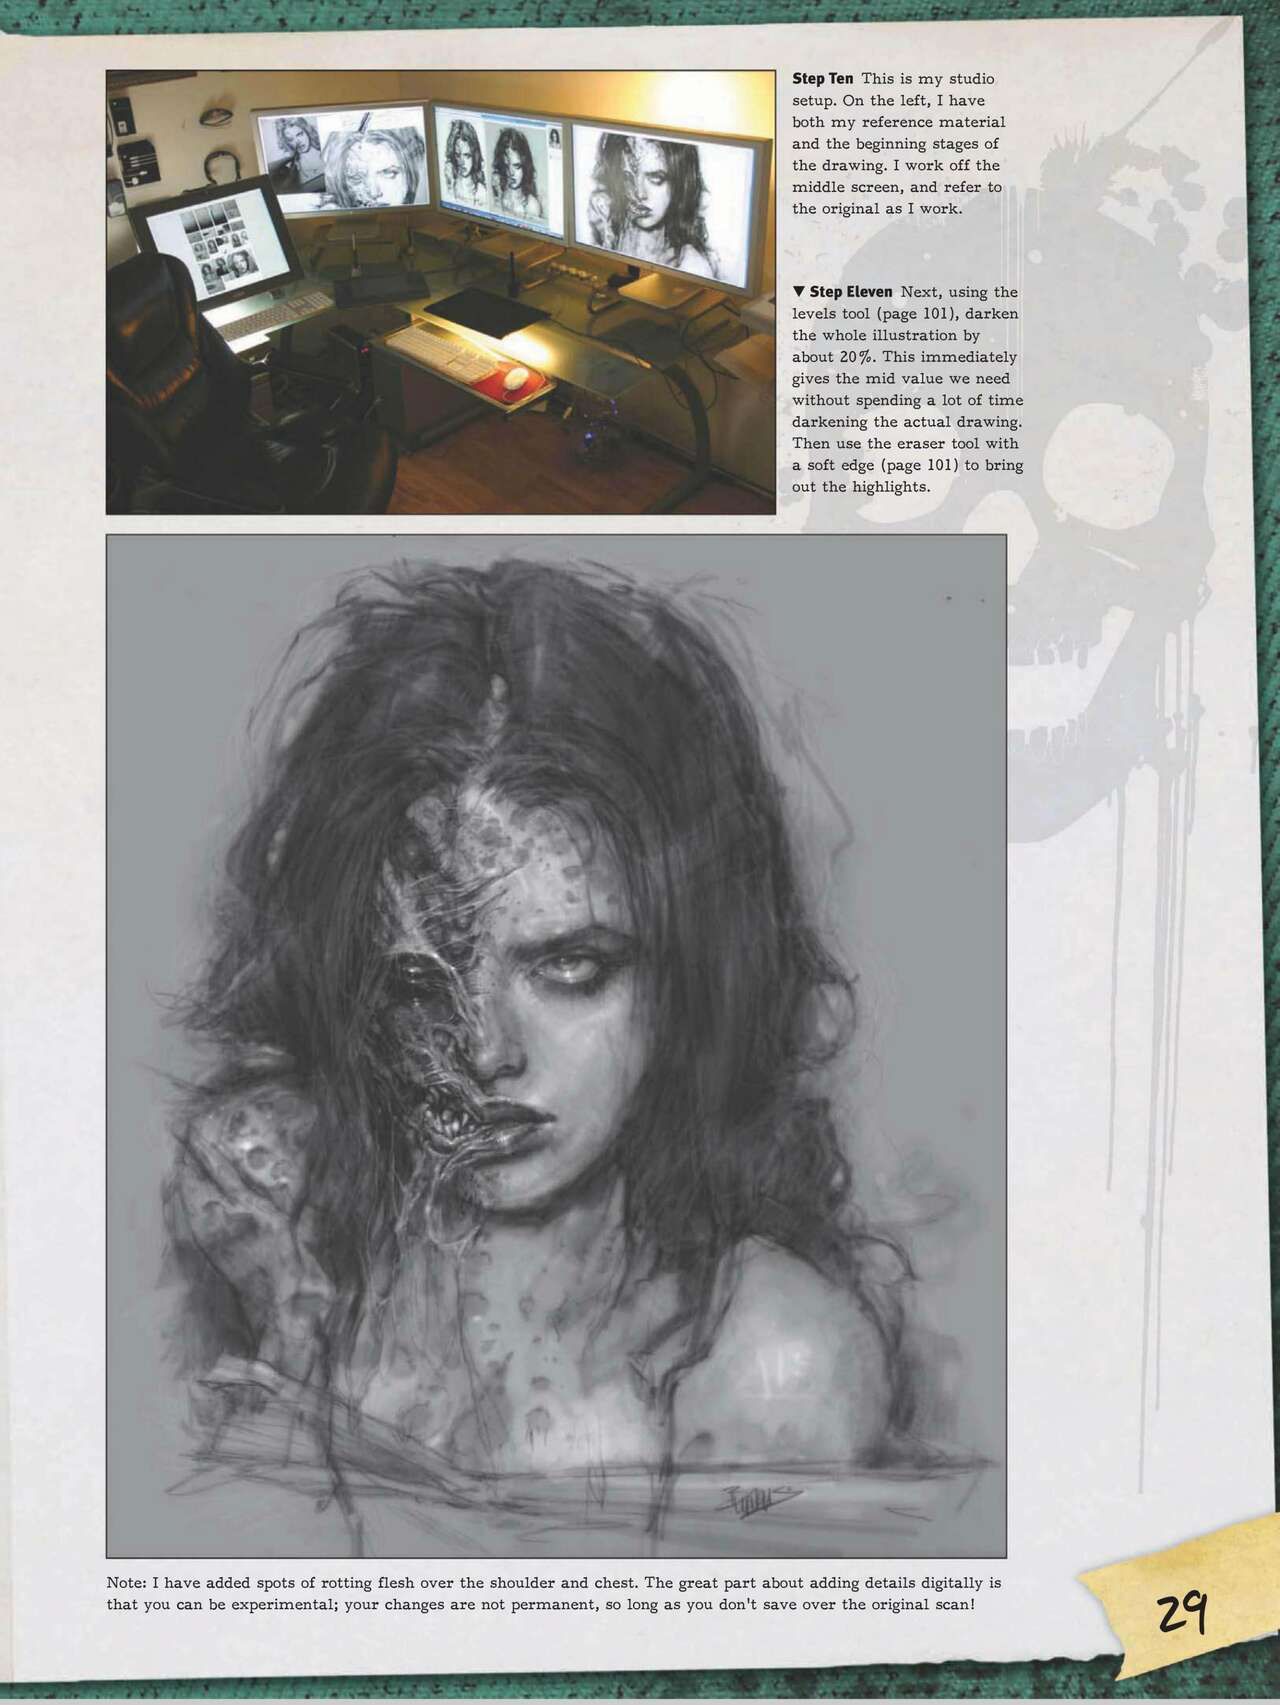 How to Draw Zombies: Discover the secrets to drawing, painting, and illustrating the undead 僵尸描绘集 30